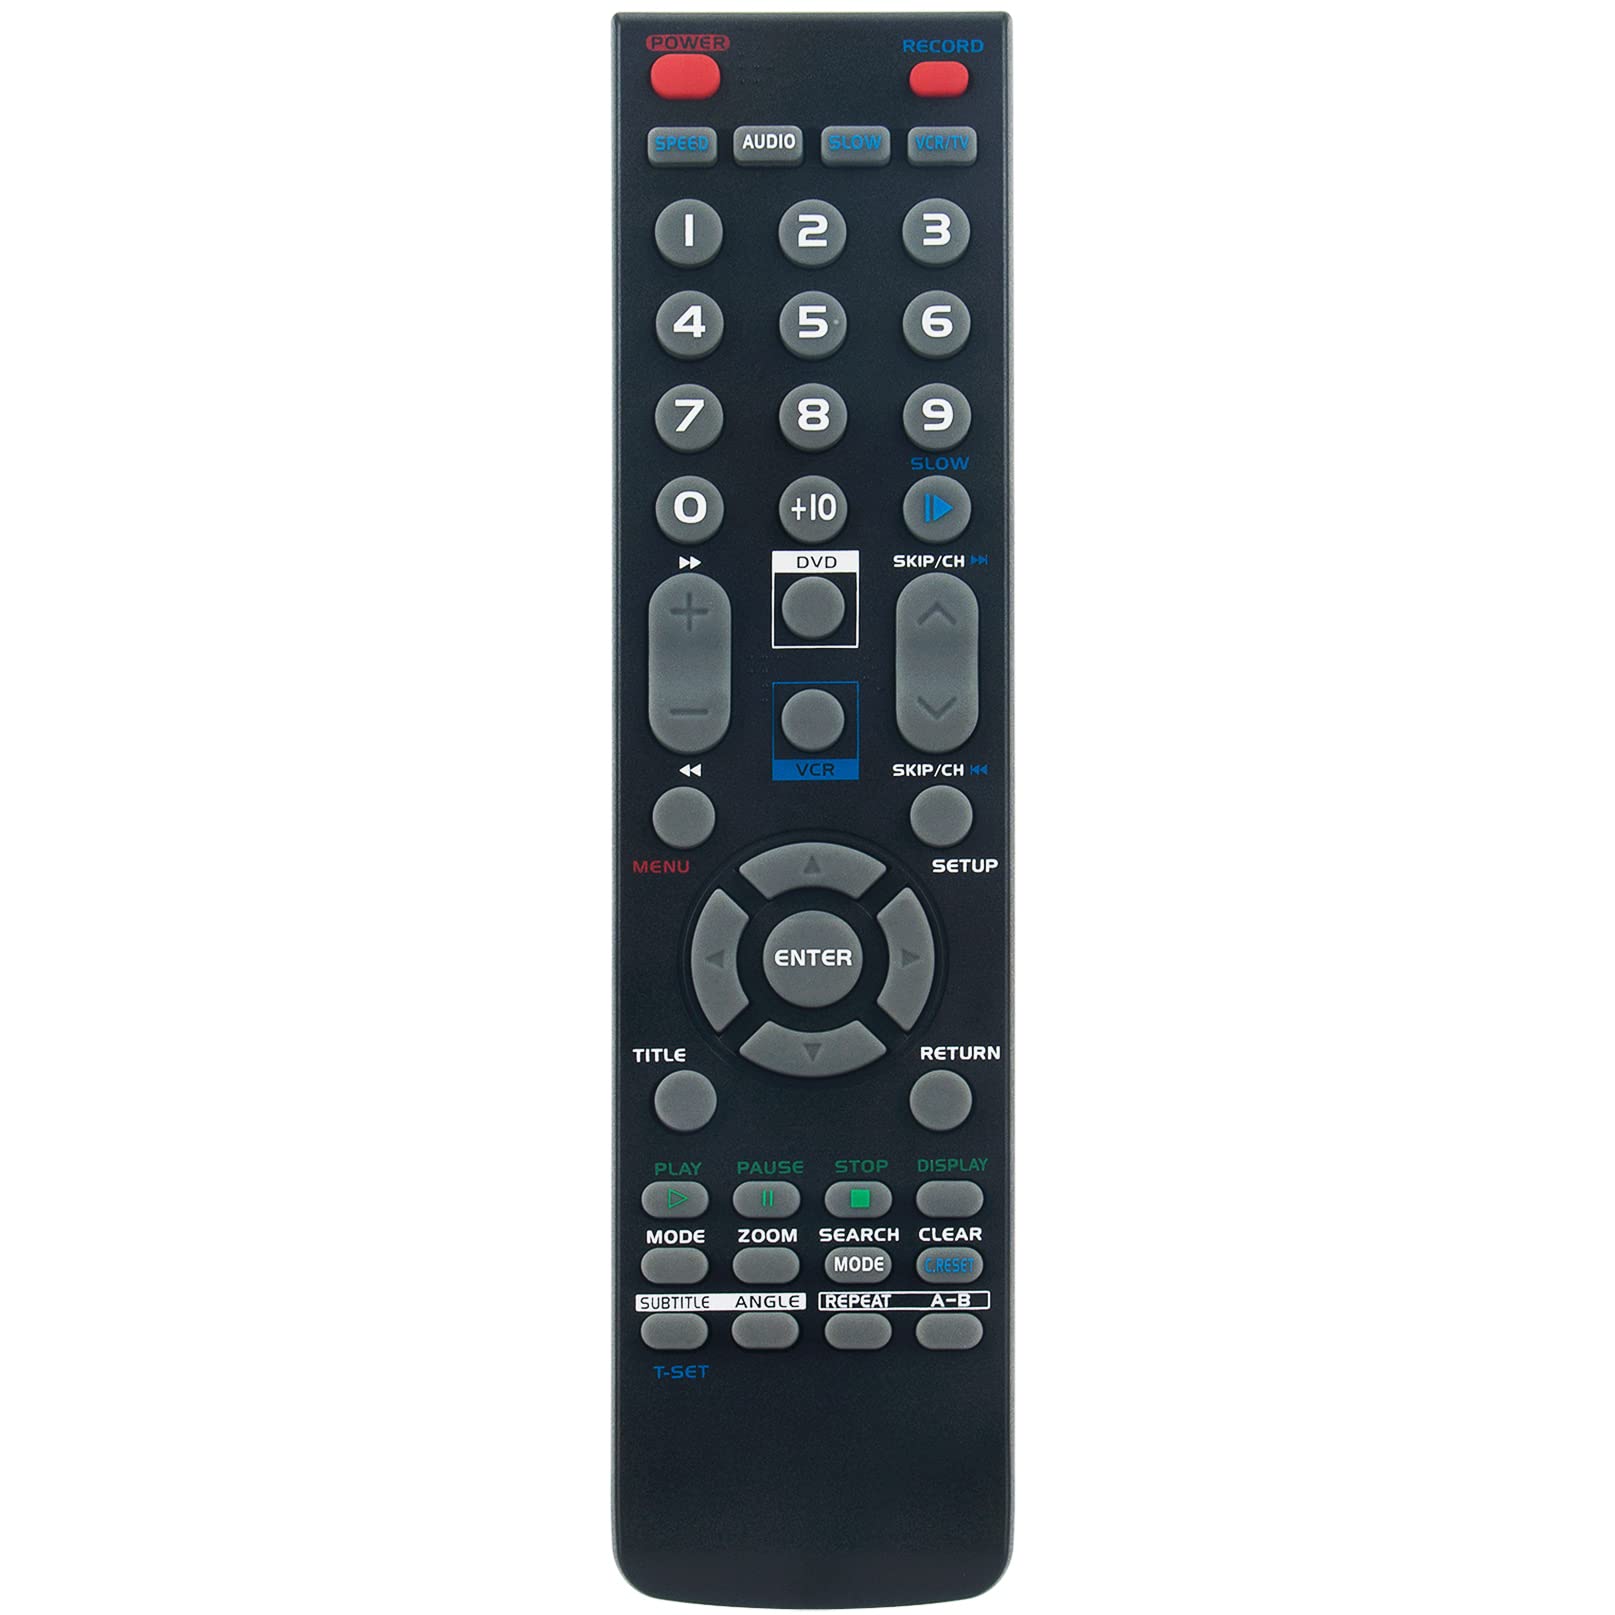 NA270 Replace Remote fit for Emerson Sylvania Symphonic Durabrand Audiovox DVD VCR Combo EWD2203M EWD2202 EWD2003 EWD2203 CEDV800D DVC800C CDVC800D SSD803 SSD800 CWF803 WF802 SD7S3 DCD2203 AXWD2002